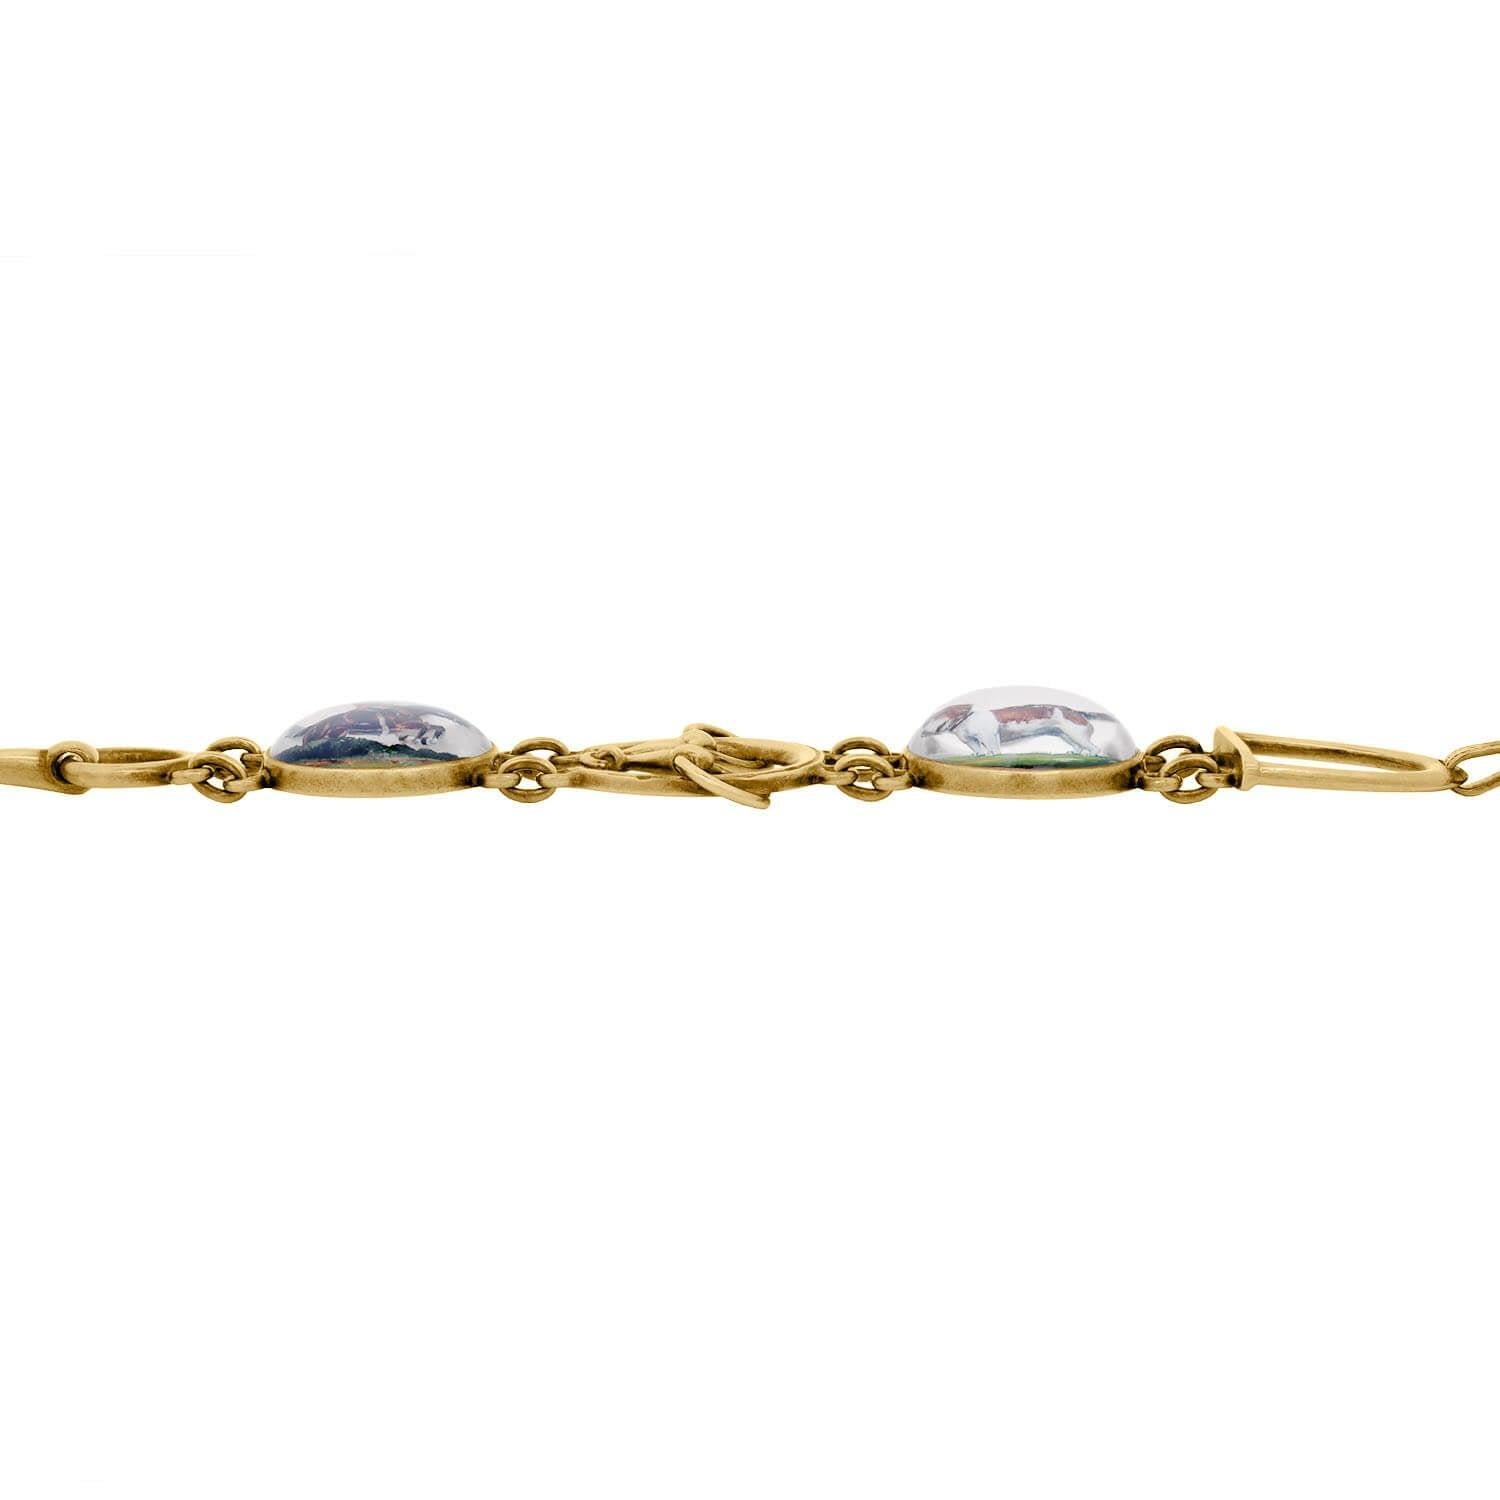 MARCUS & CO. Art Deco 14k Essex Crystal Bracelet In Good Condition For Sale In Narberth, PA